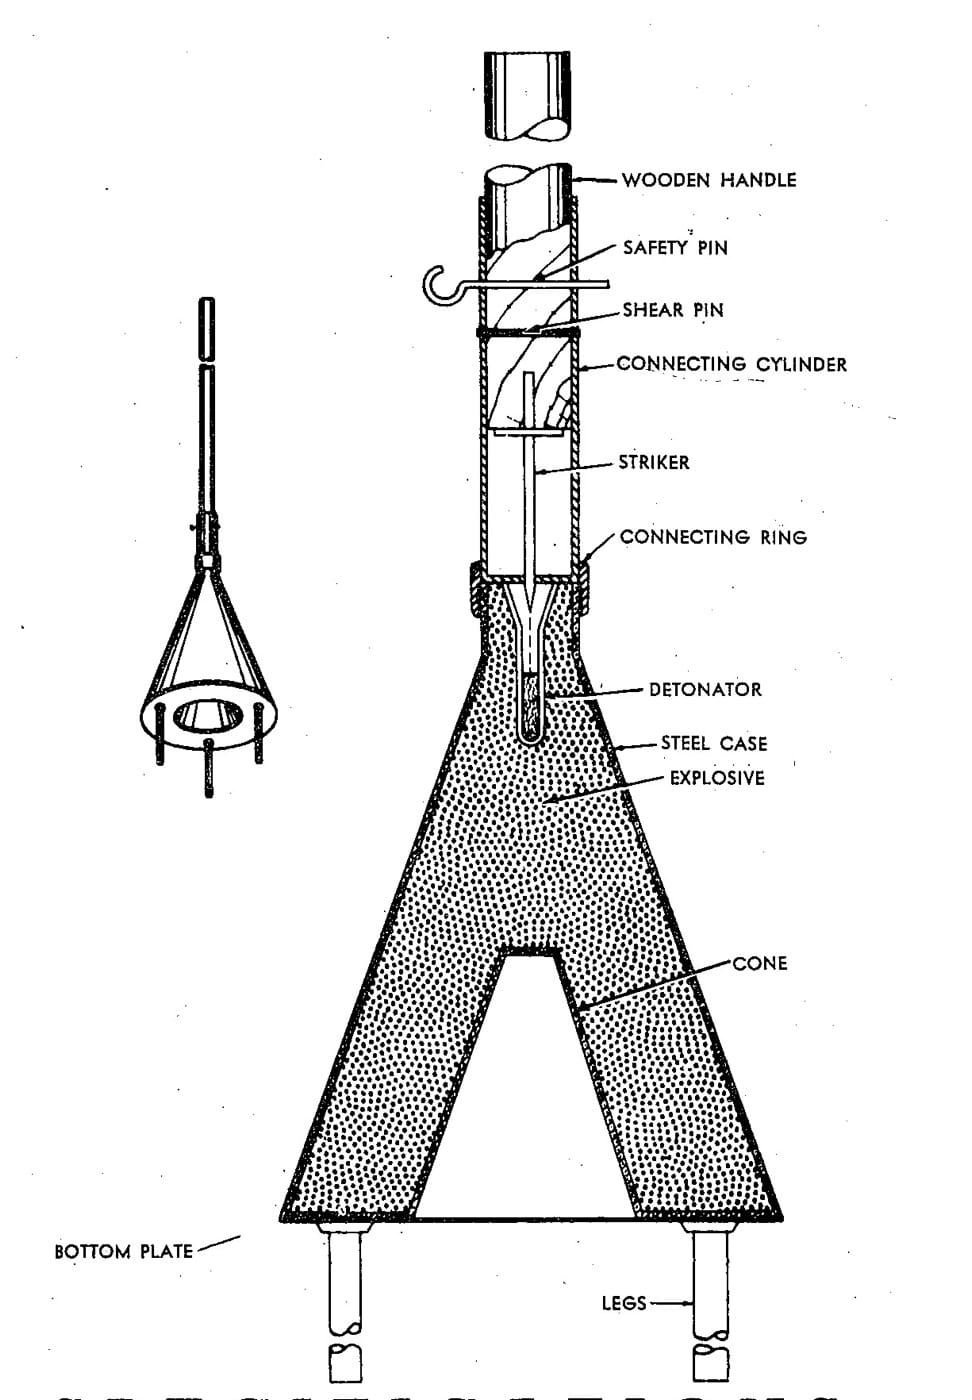 Shown here is a diagram of the Japanese mine's warhead. It required the user to remove the safety pin in the shaft section prior to using.